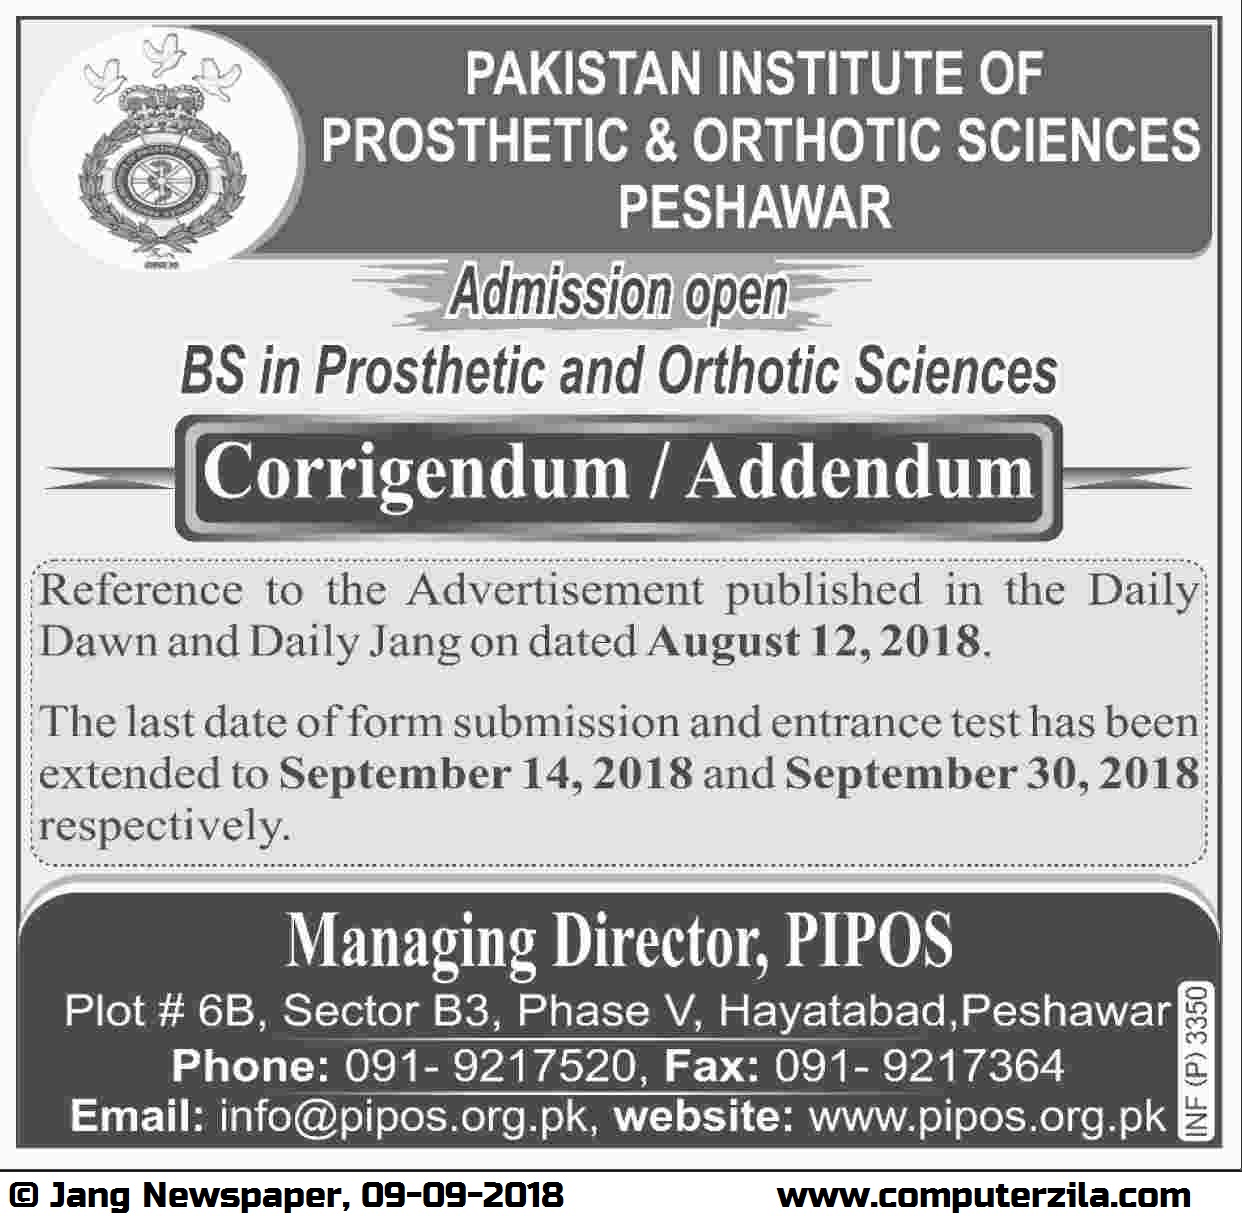 Admissions Open For Fall 2018 At PIPOS Peshawar Campus